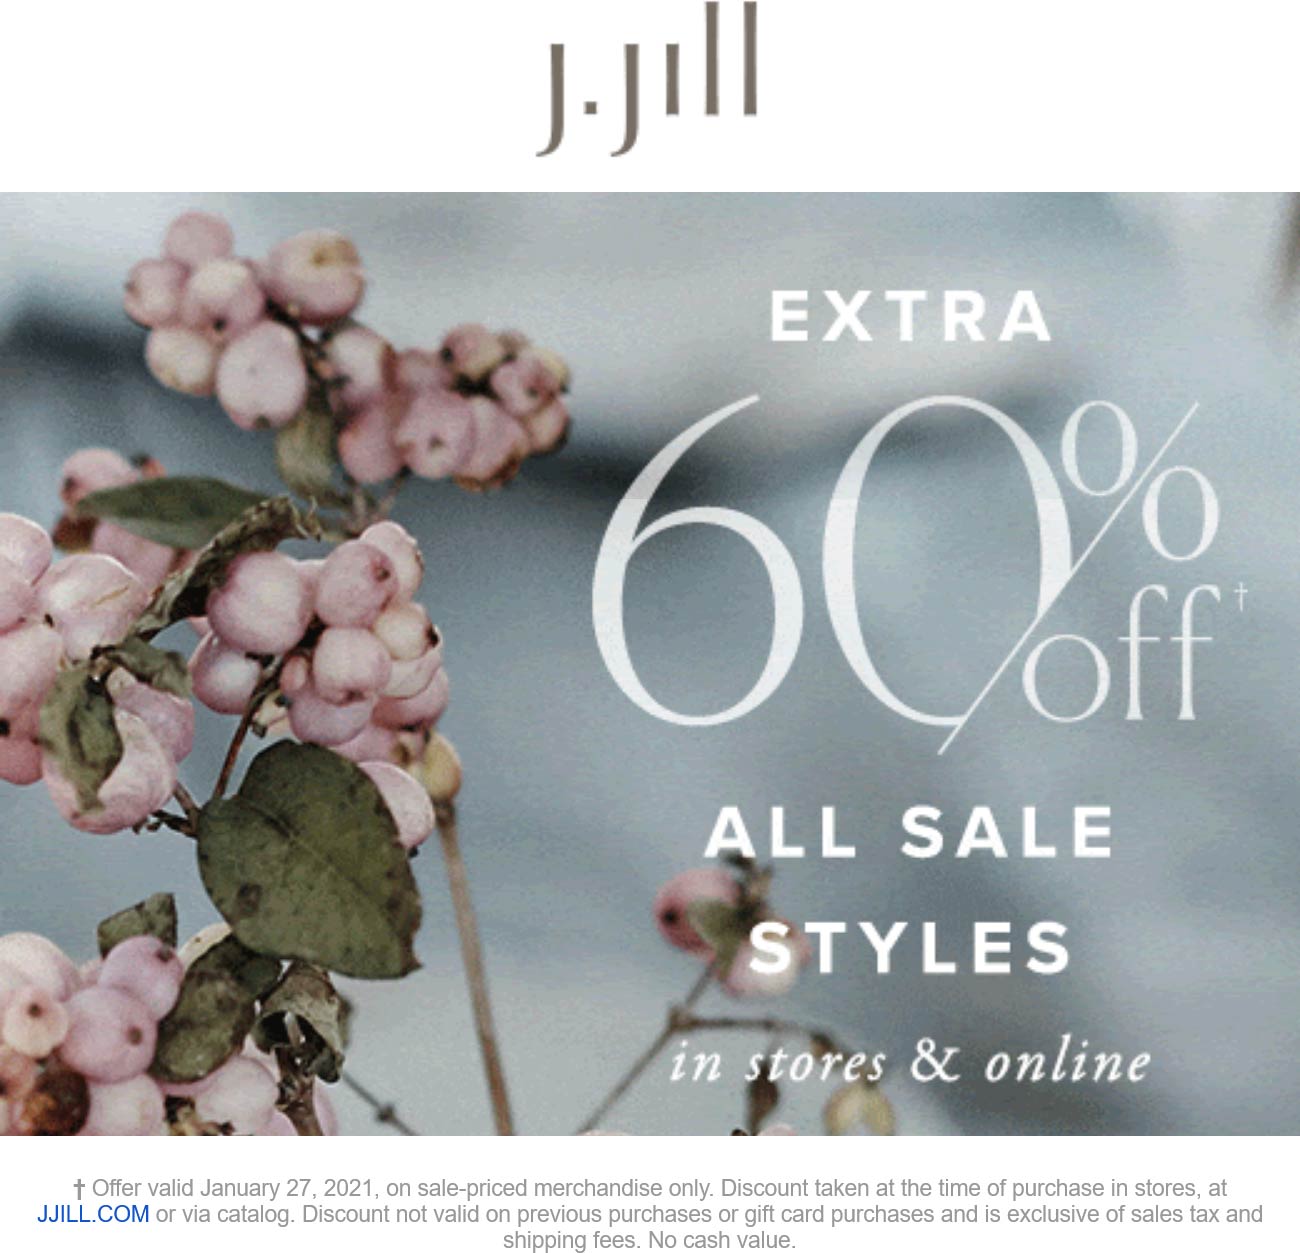 Extra 60 off all sale sytles today at J.Jill, ditto online jjill